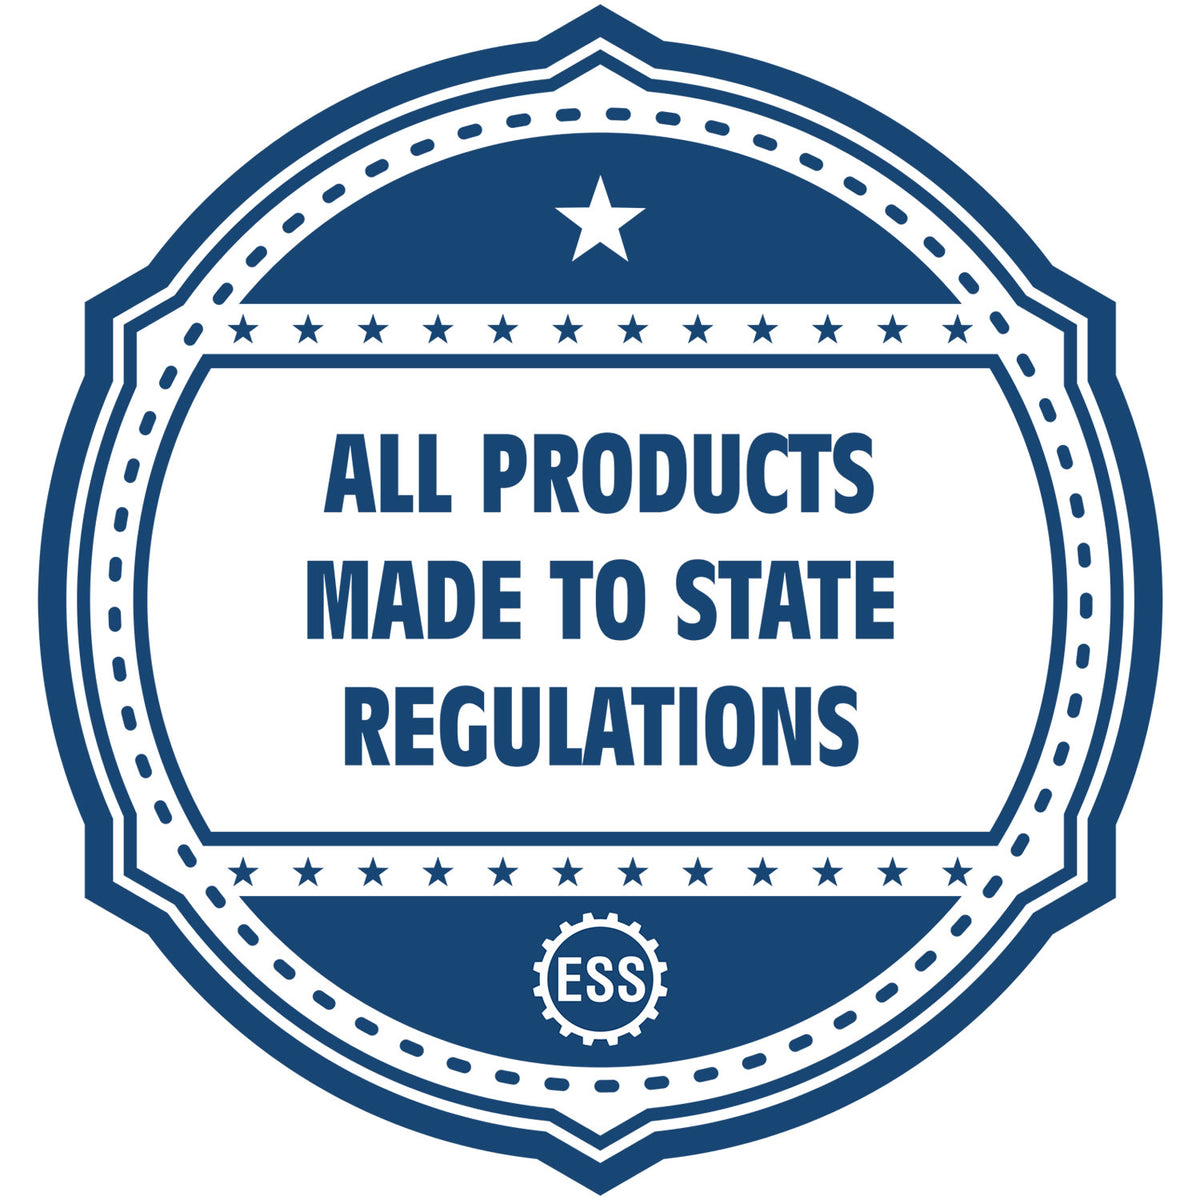 An icon or badge element for the Self-Inking Maryland PE Stamp showing that this product is made in compliance with state regulations.